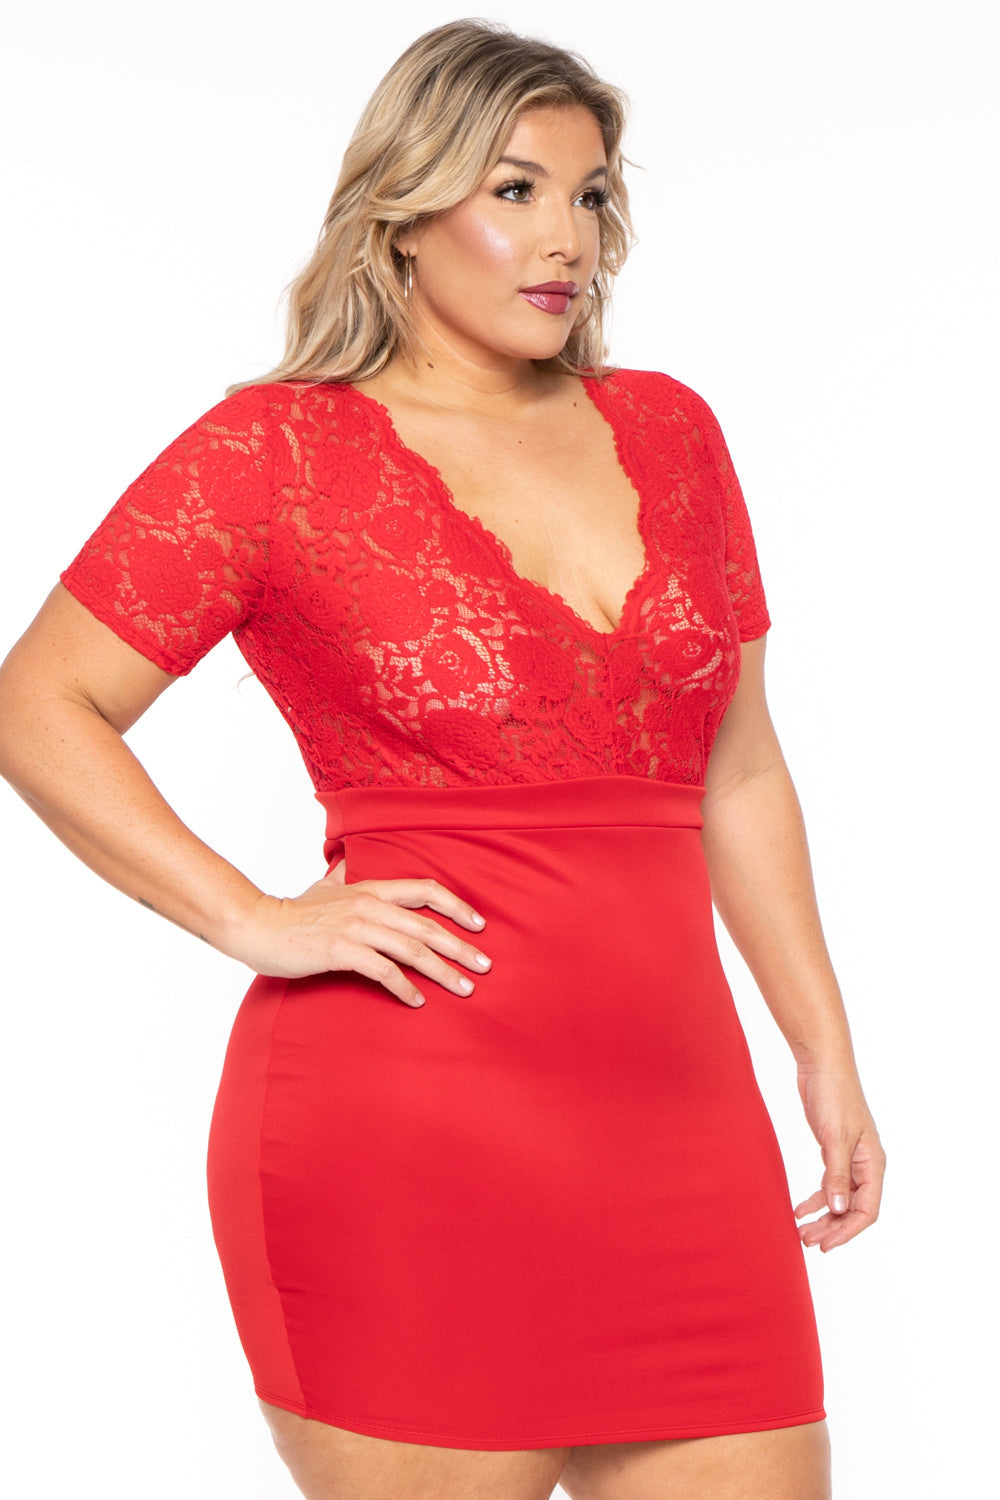 Plus Size Lace Top Dress - Red